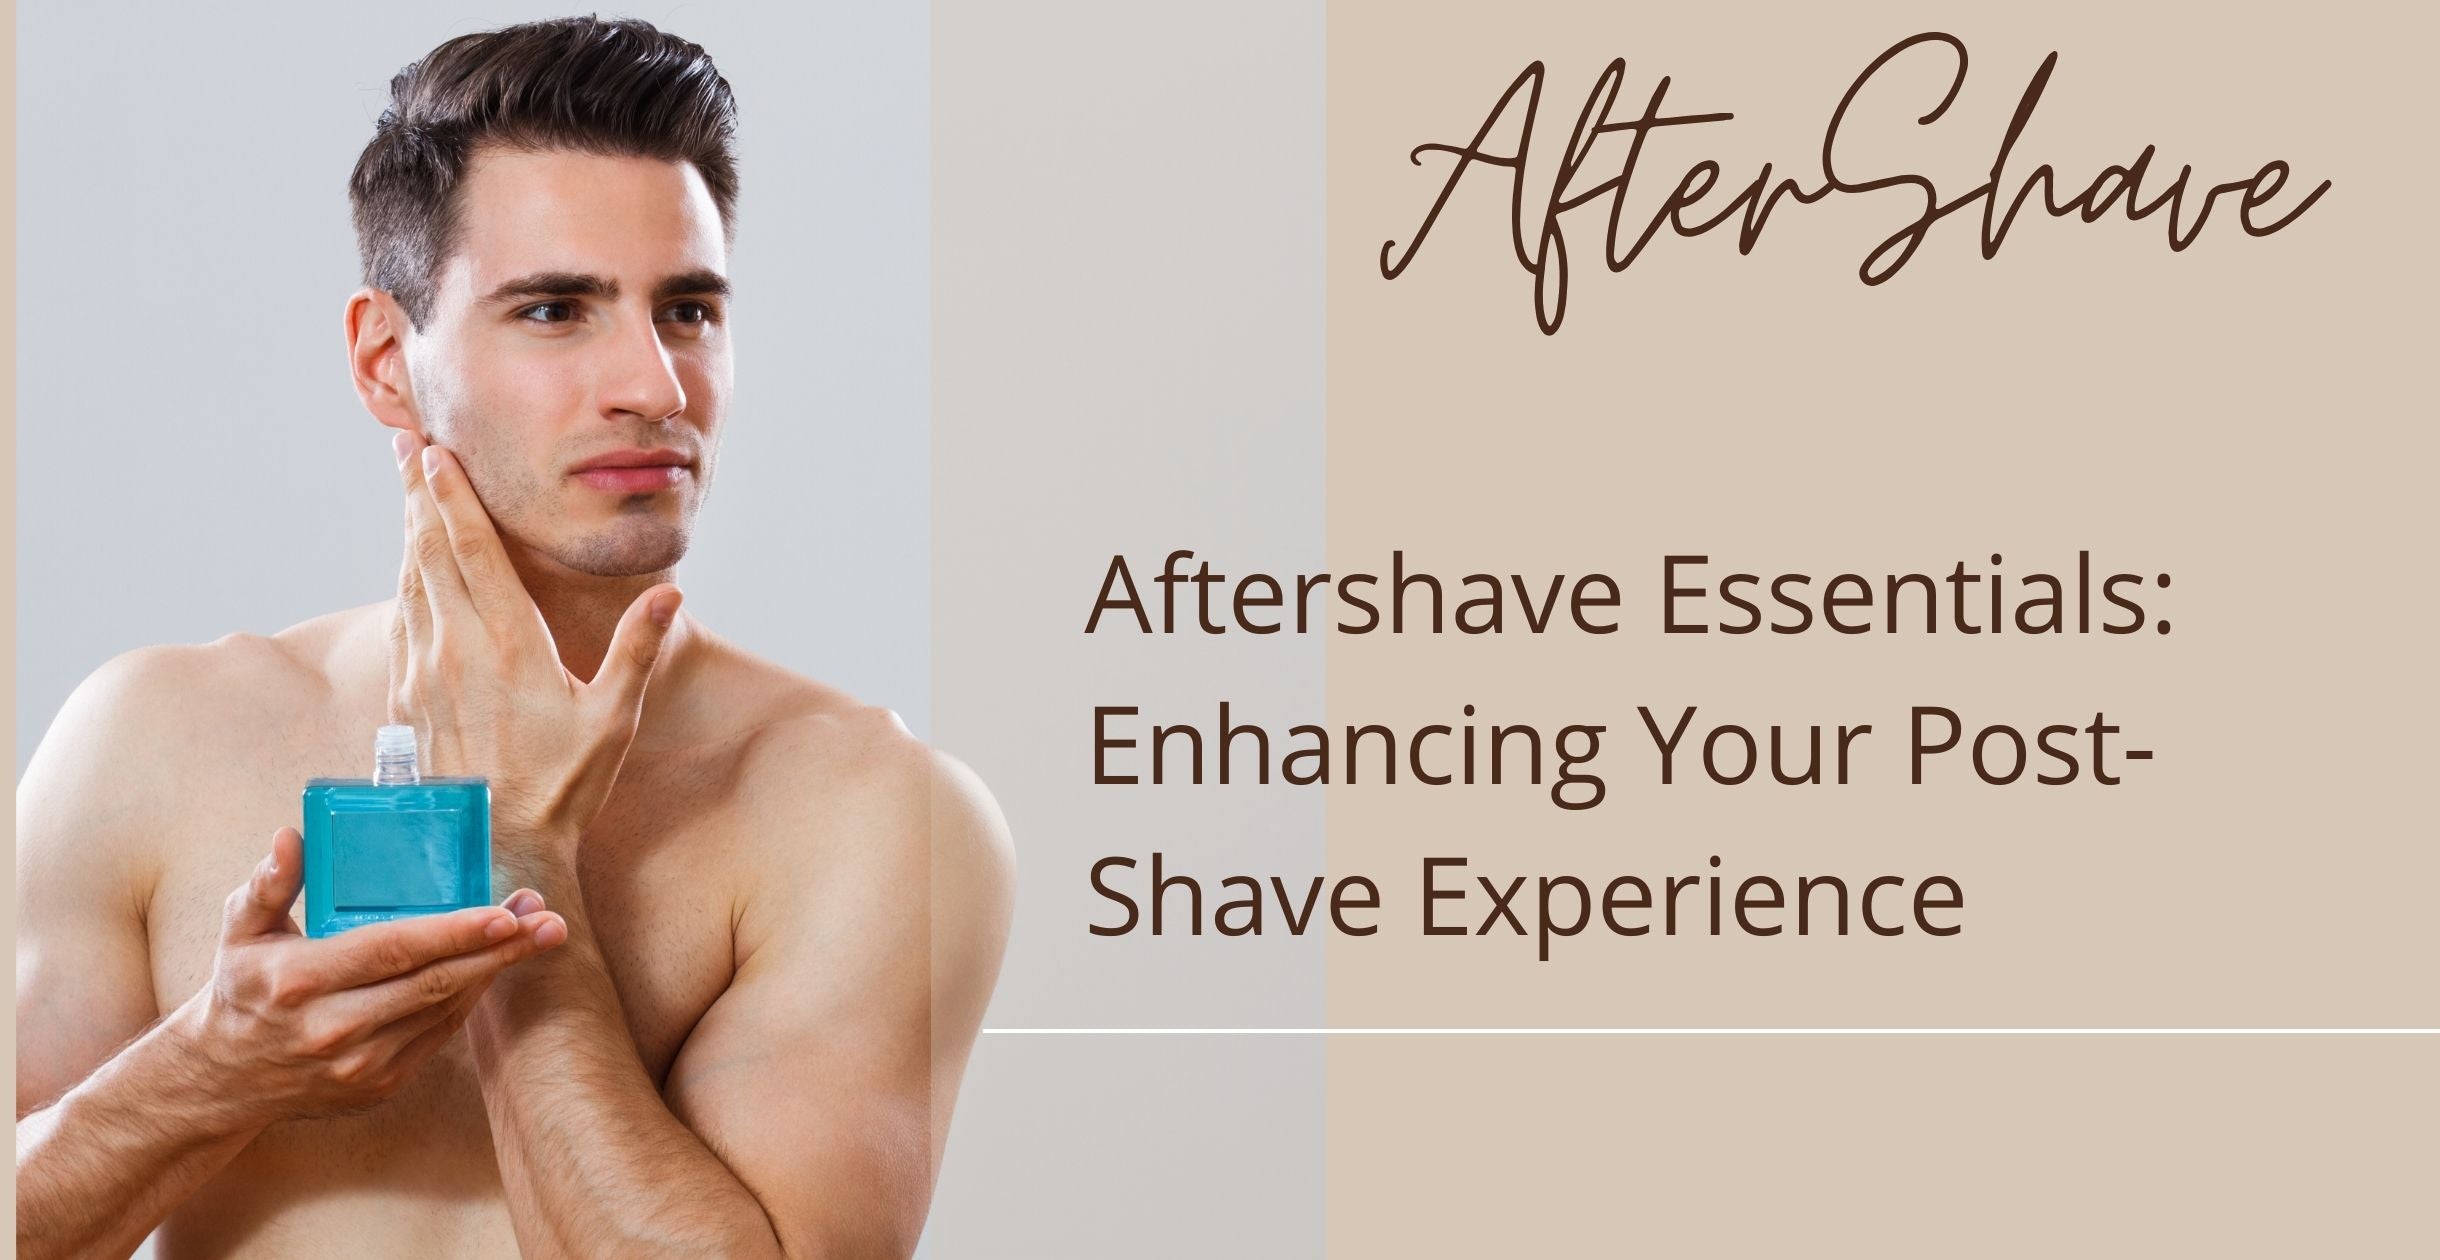 Aftershave Essentials: Enhancing Your Post-Shave Experience